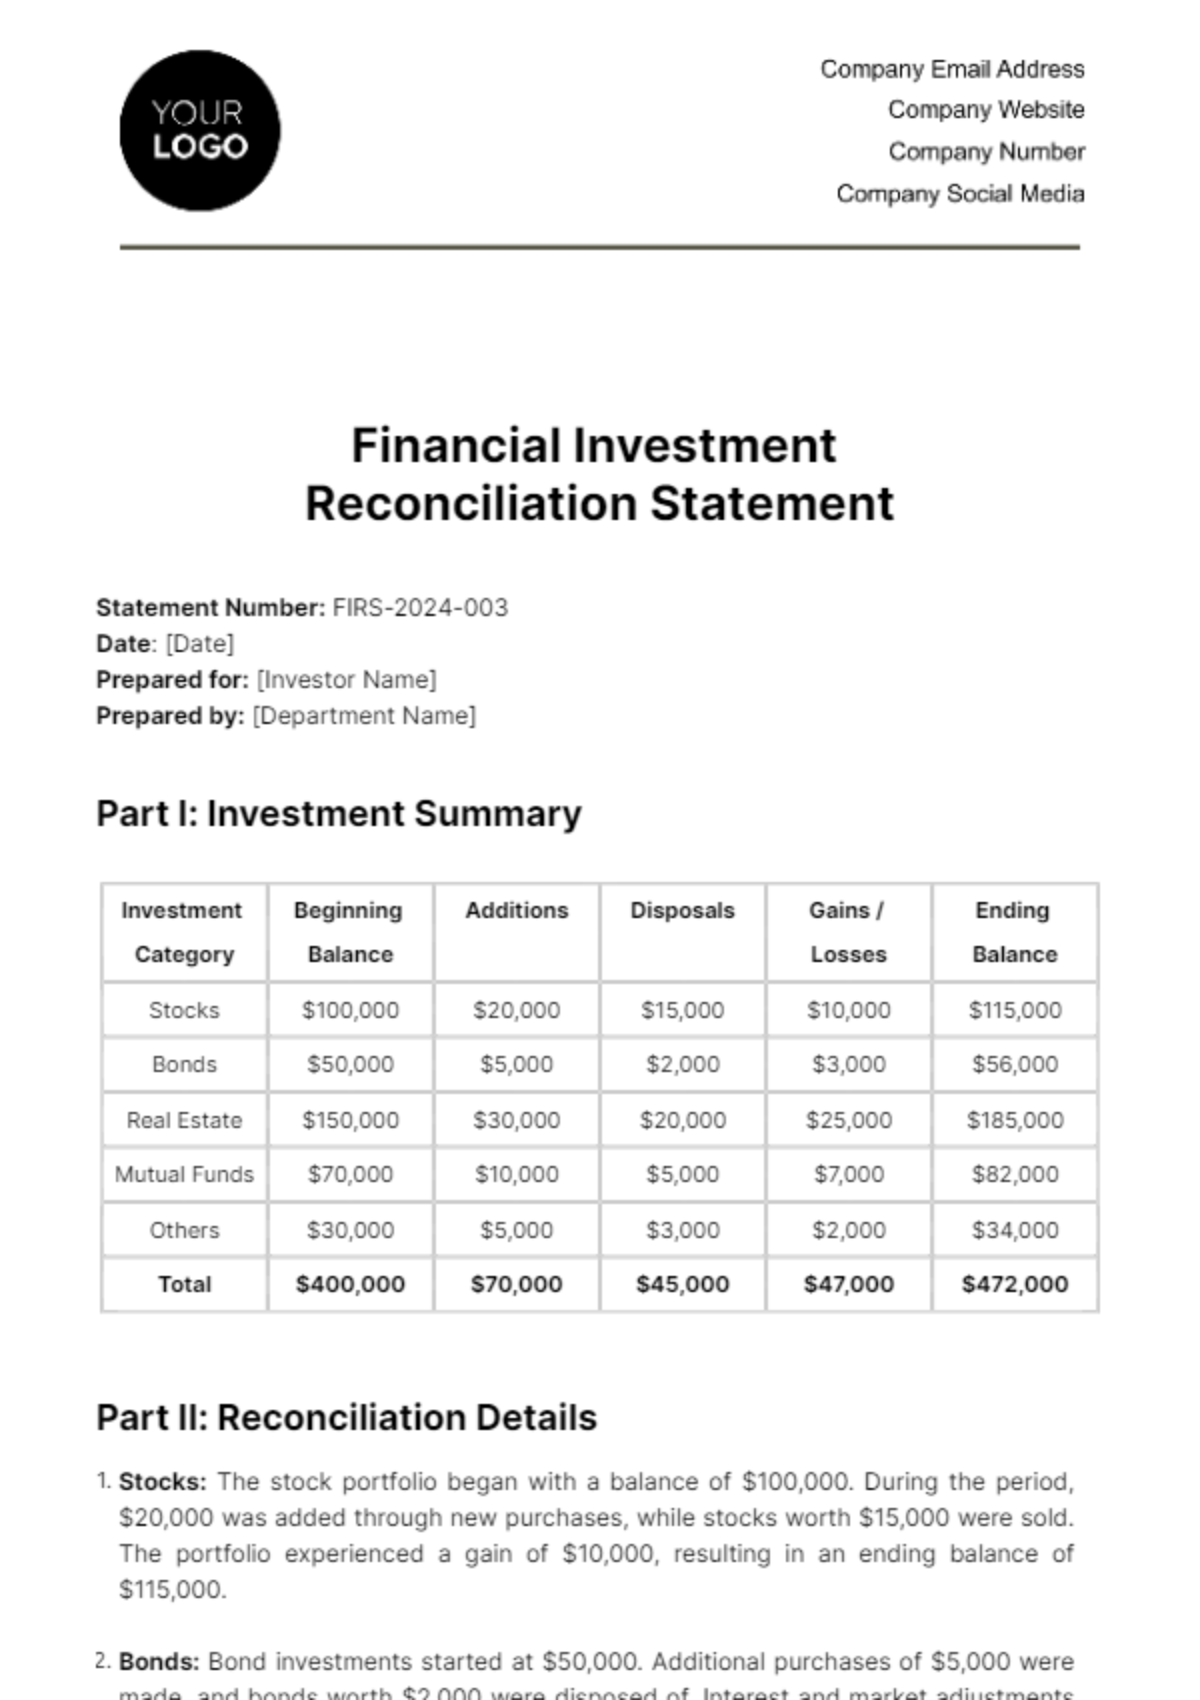 Financial Investment Reconciliation Statement Template